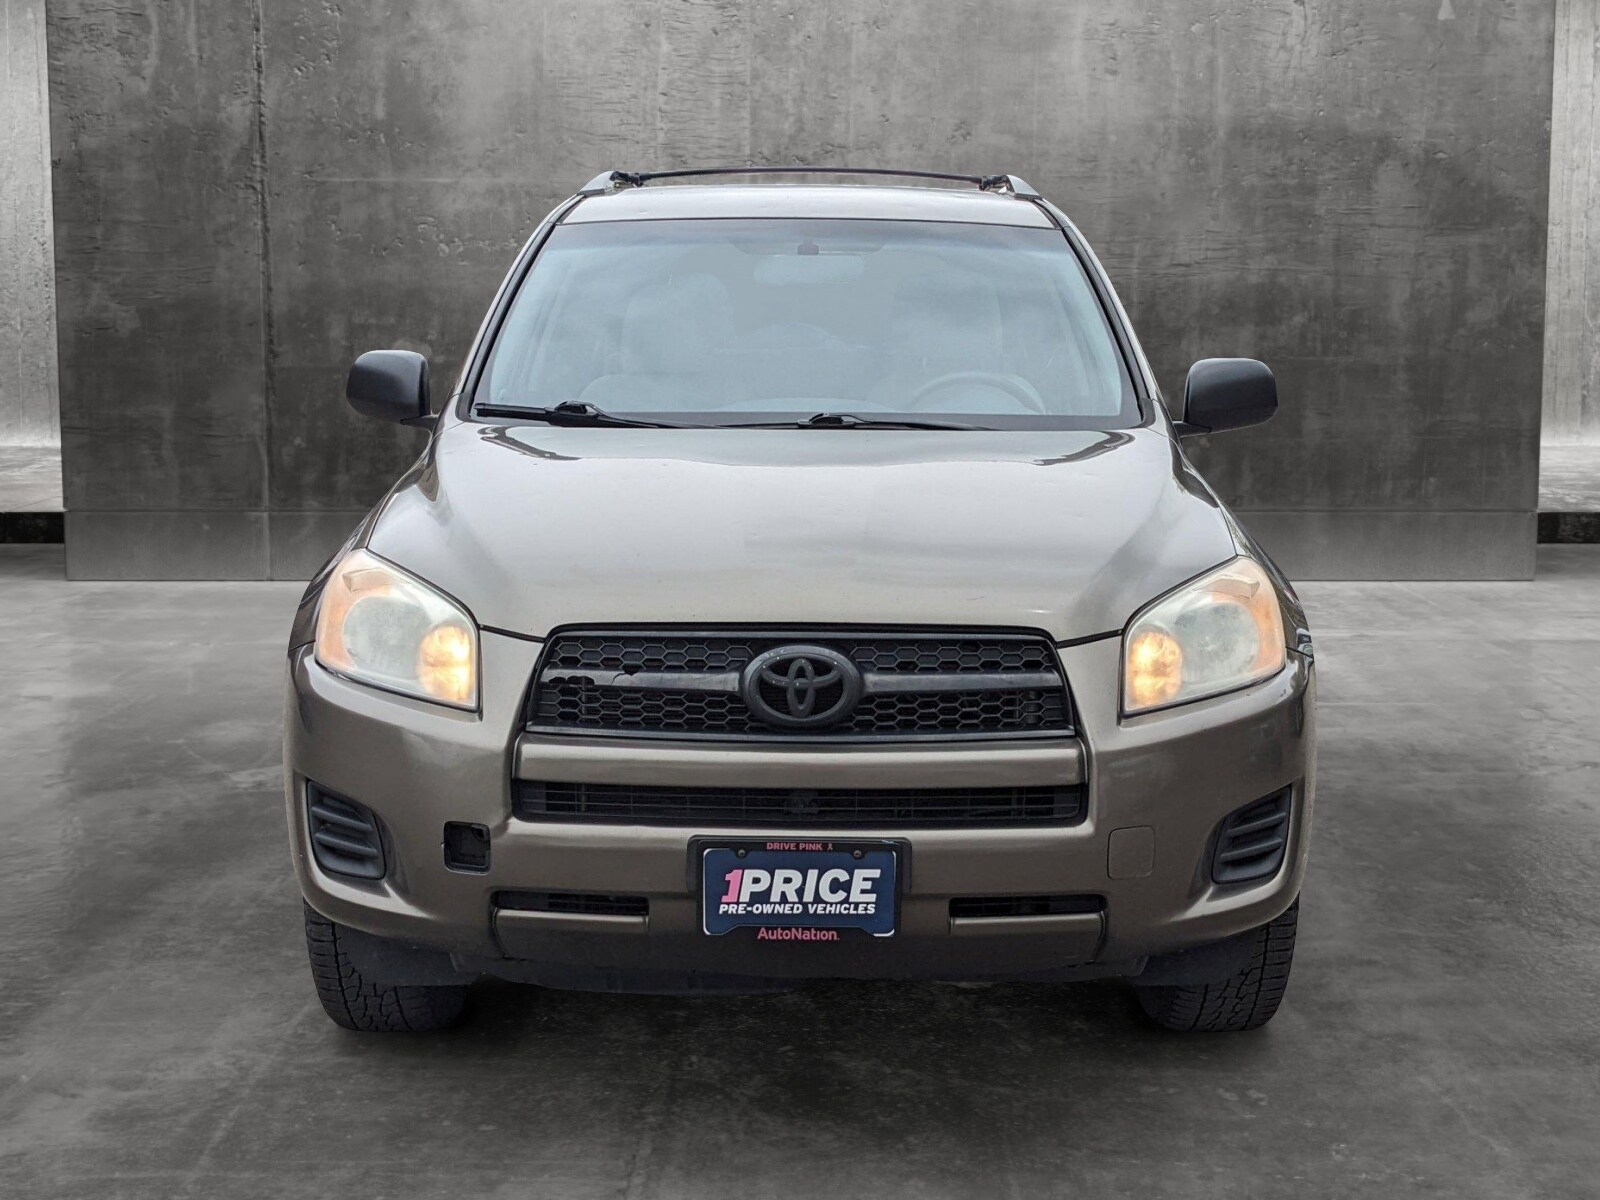 Used 2012 Toyota RAV4  with VIN 2T3BF4DV3CW196990 for sale in Golden, CO